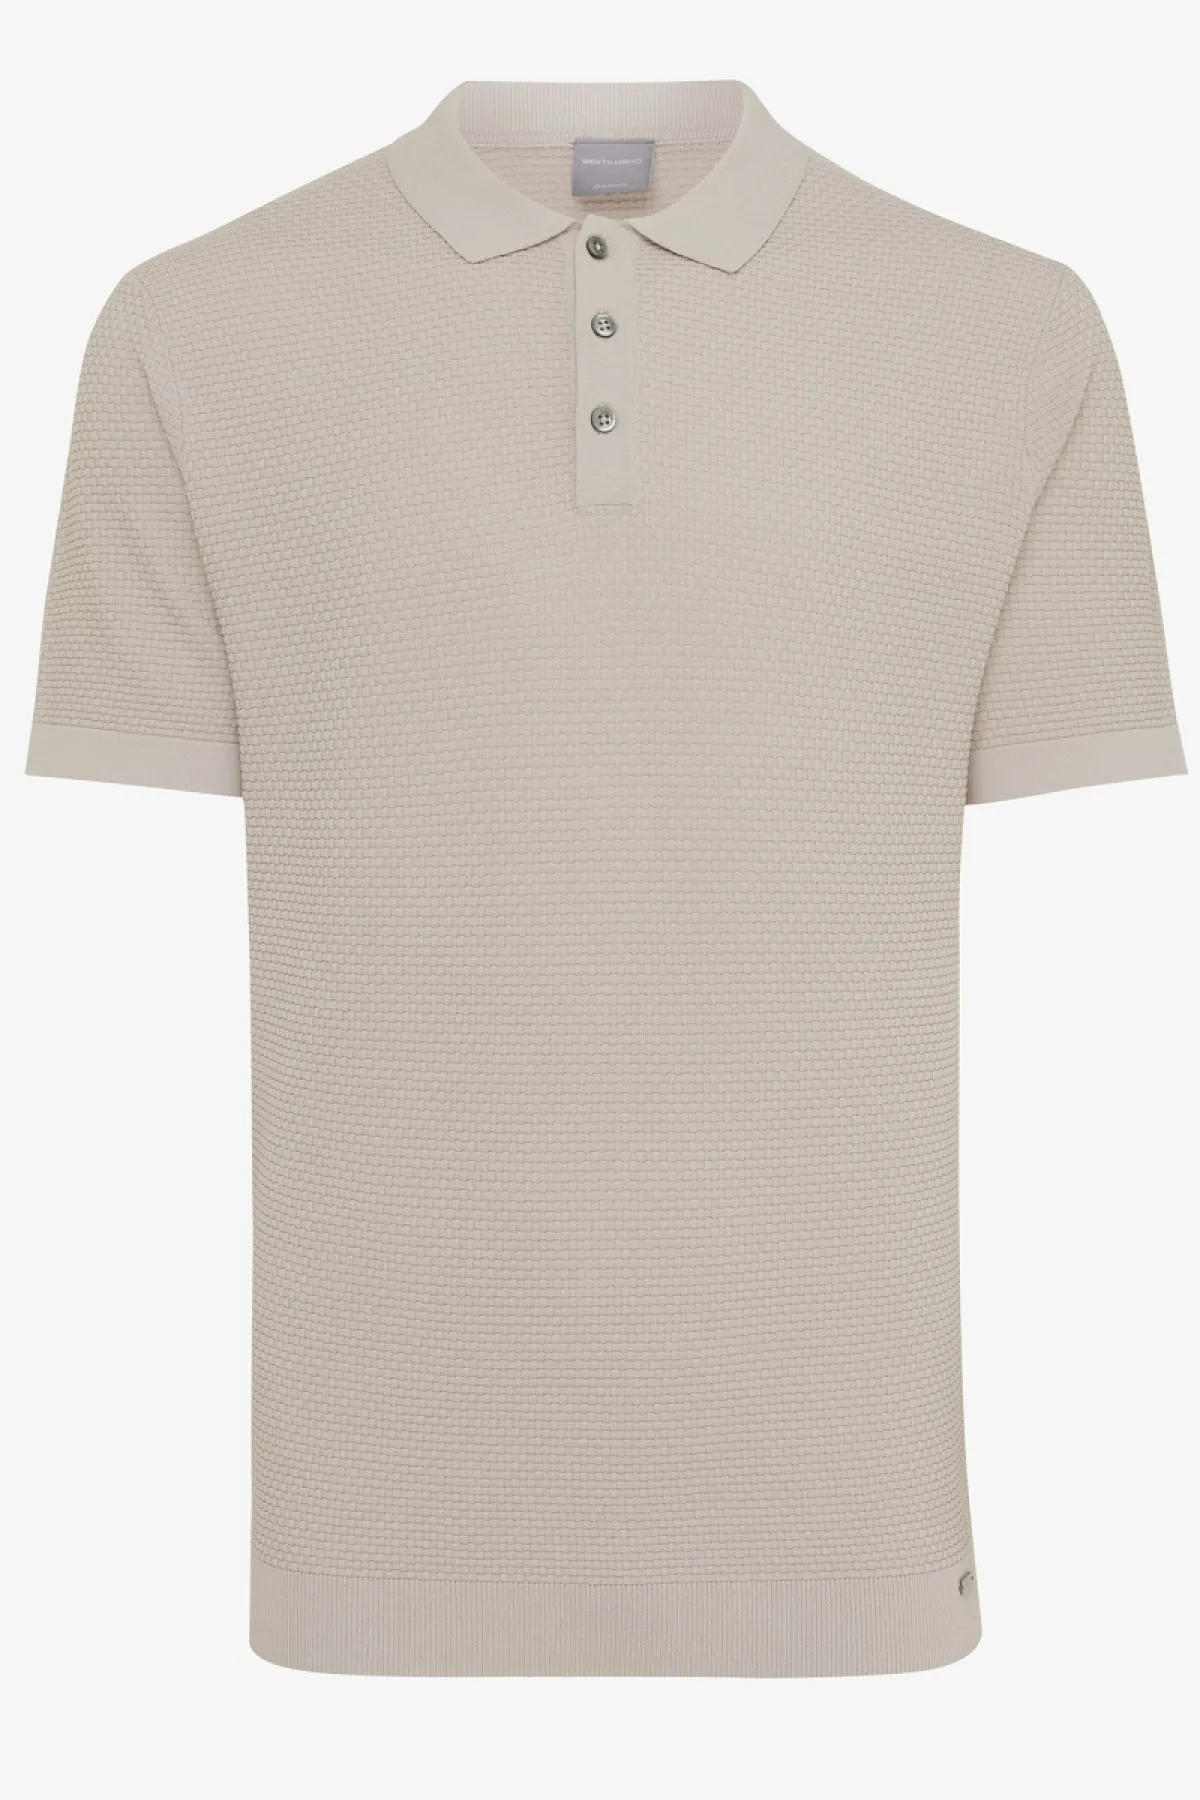 Beige cool dry structuur polo